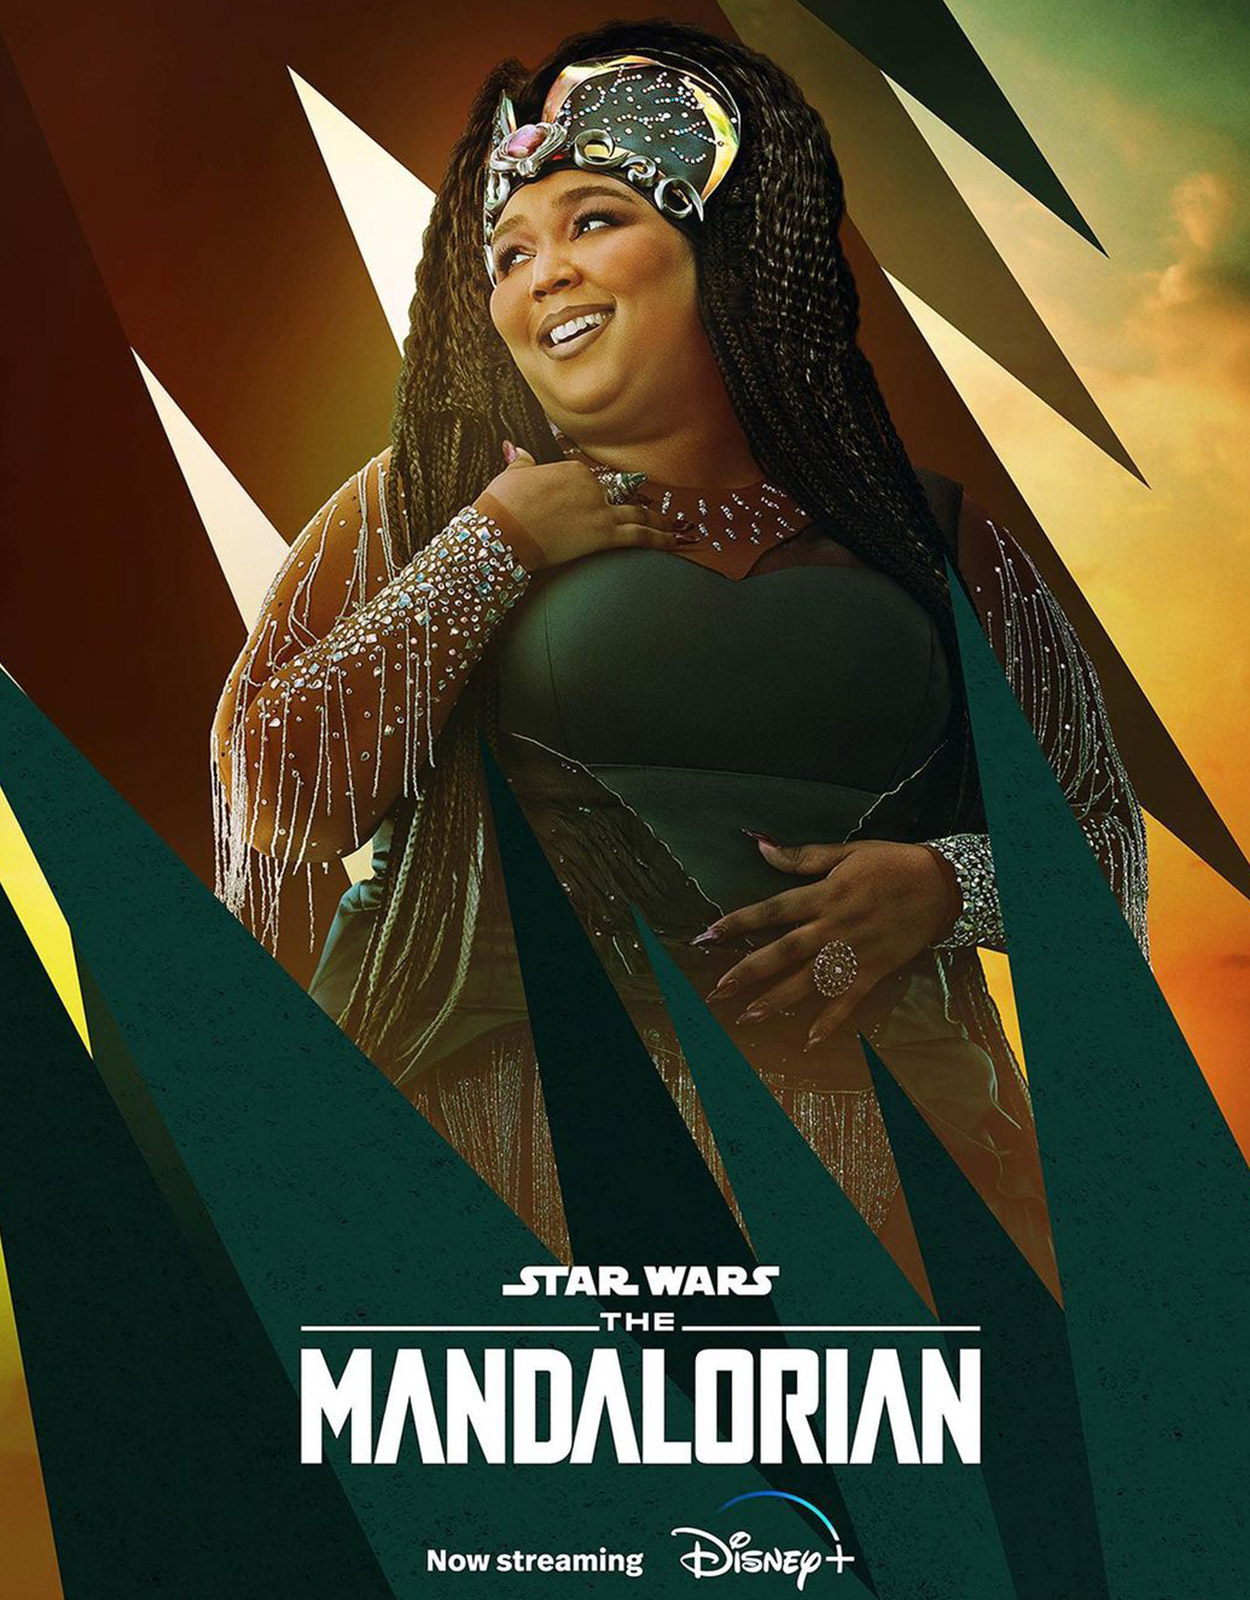 Lizzo in Star Wars The Mandalorian as the Duchess